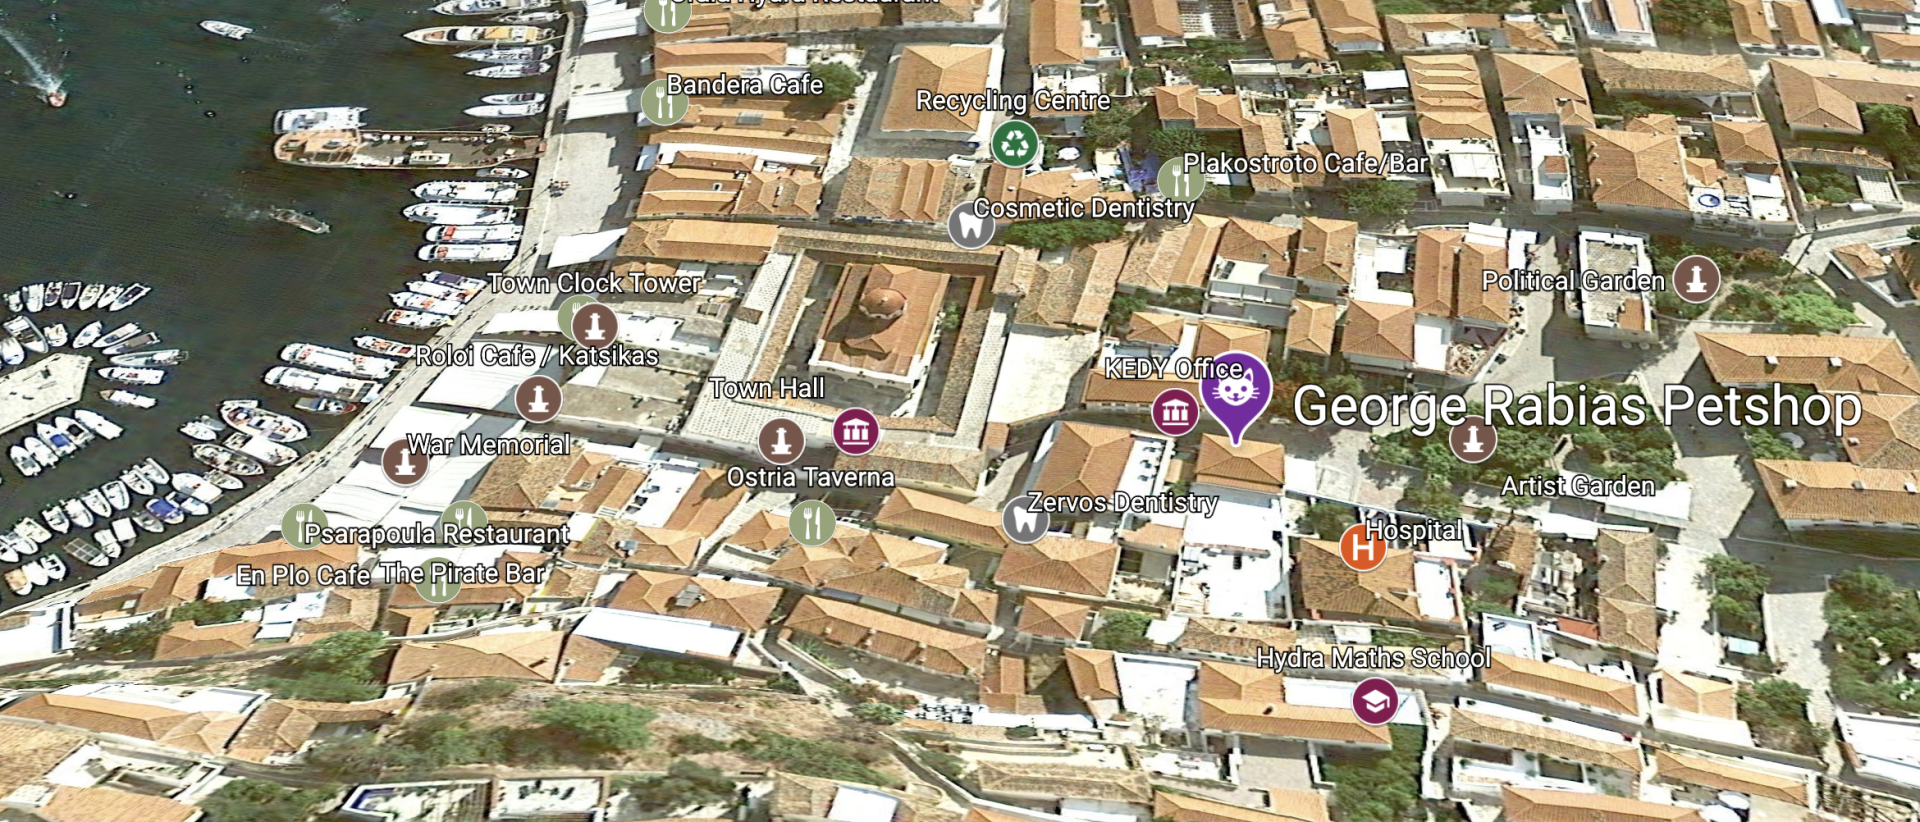 Map to find the George Rabias Petshop on the Greek Island of Hydra.